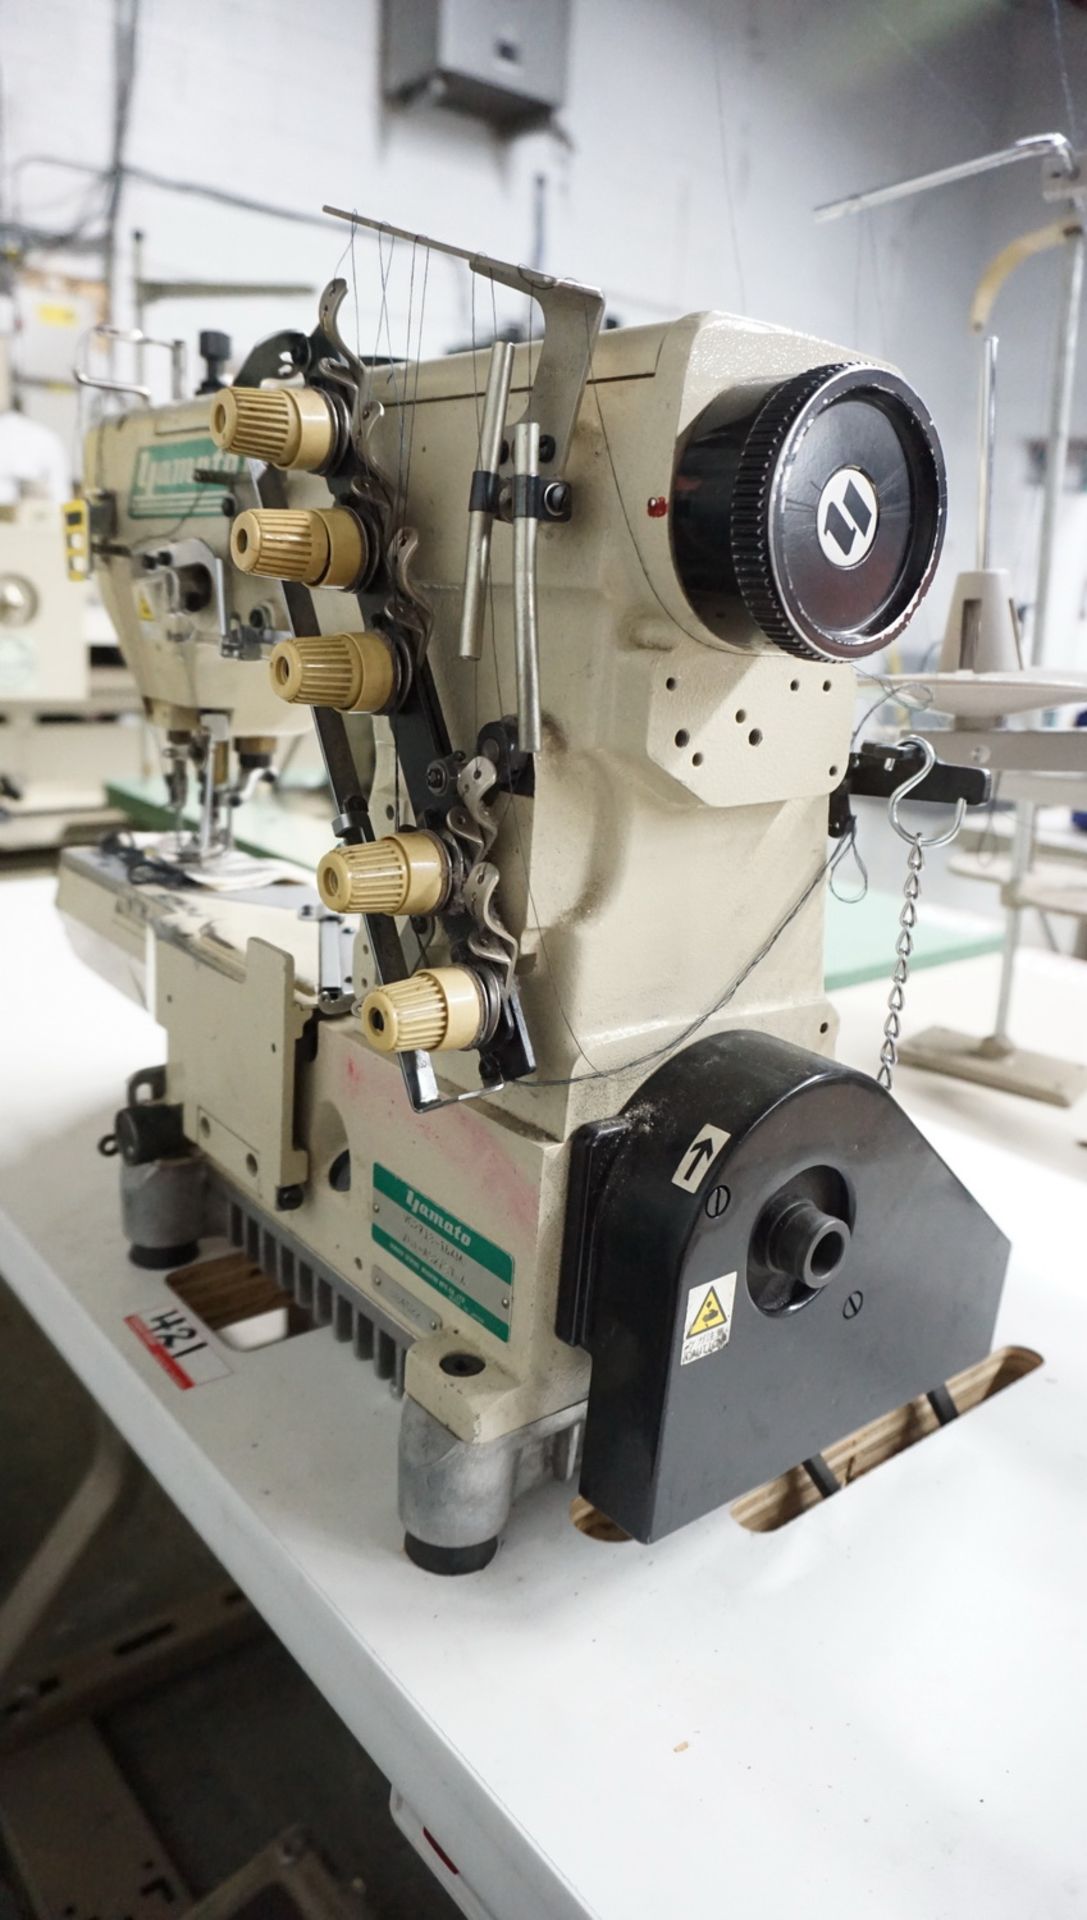 YAMATO VC2713-164M/UT-A32/ST-A 3-NEEDLE CYLINDER COVERSTITCH MACHINE, S/N N84522 (LOCATED @ 101 - Image 4 of 6